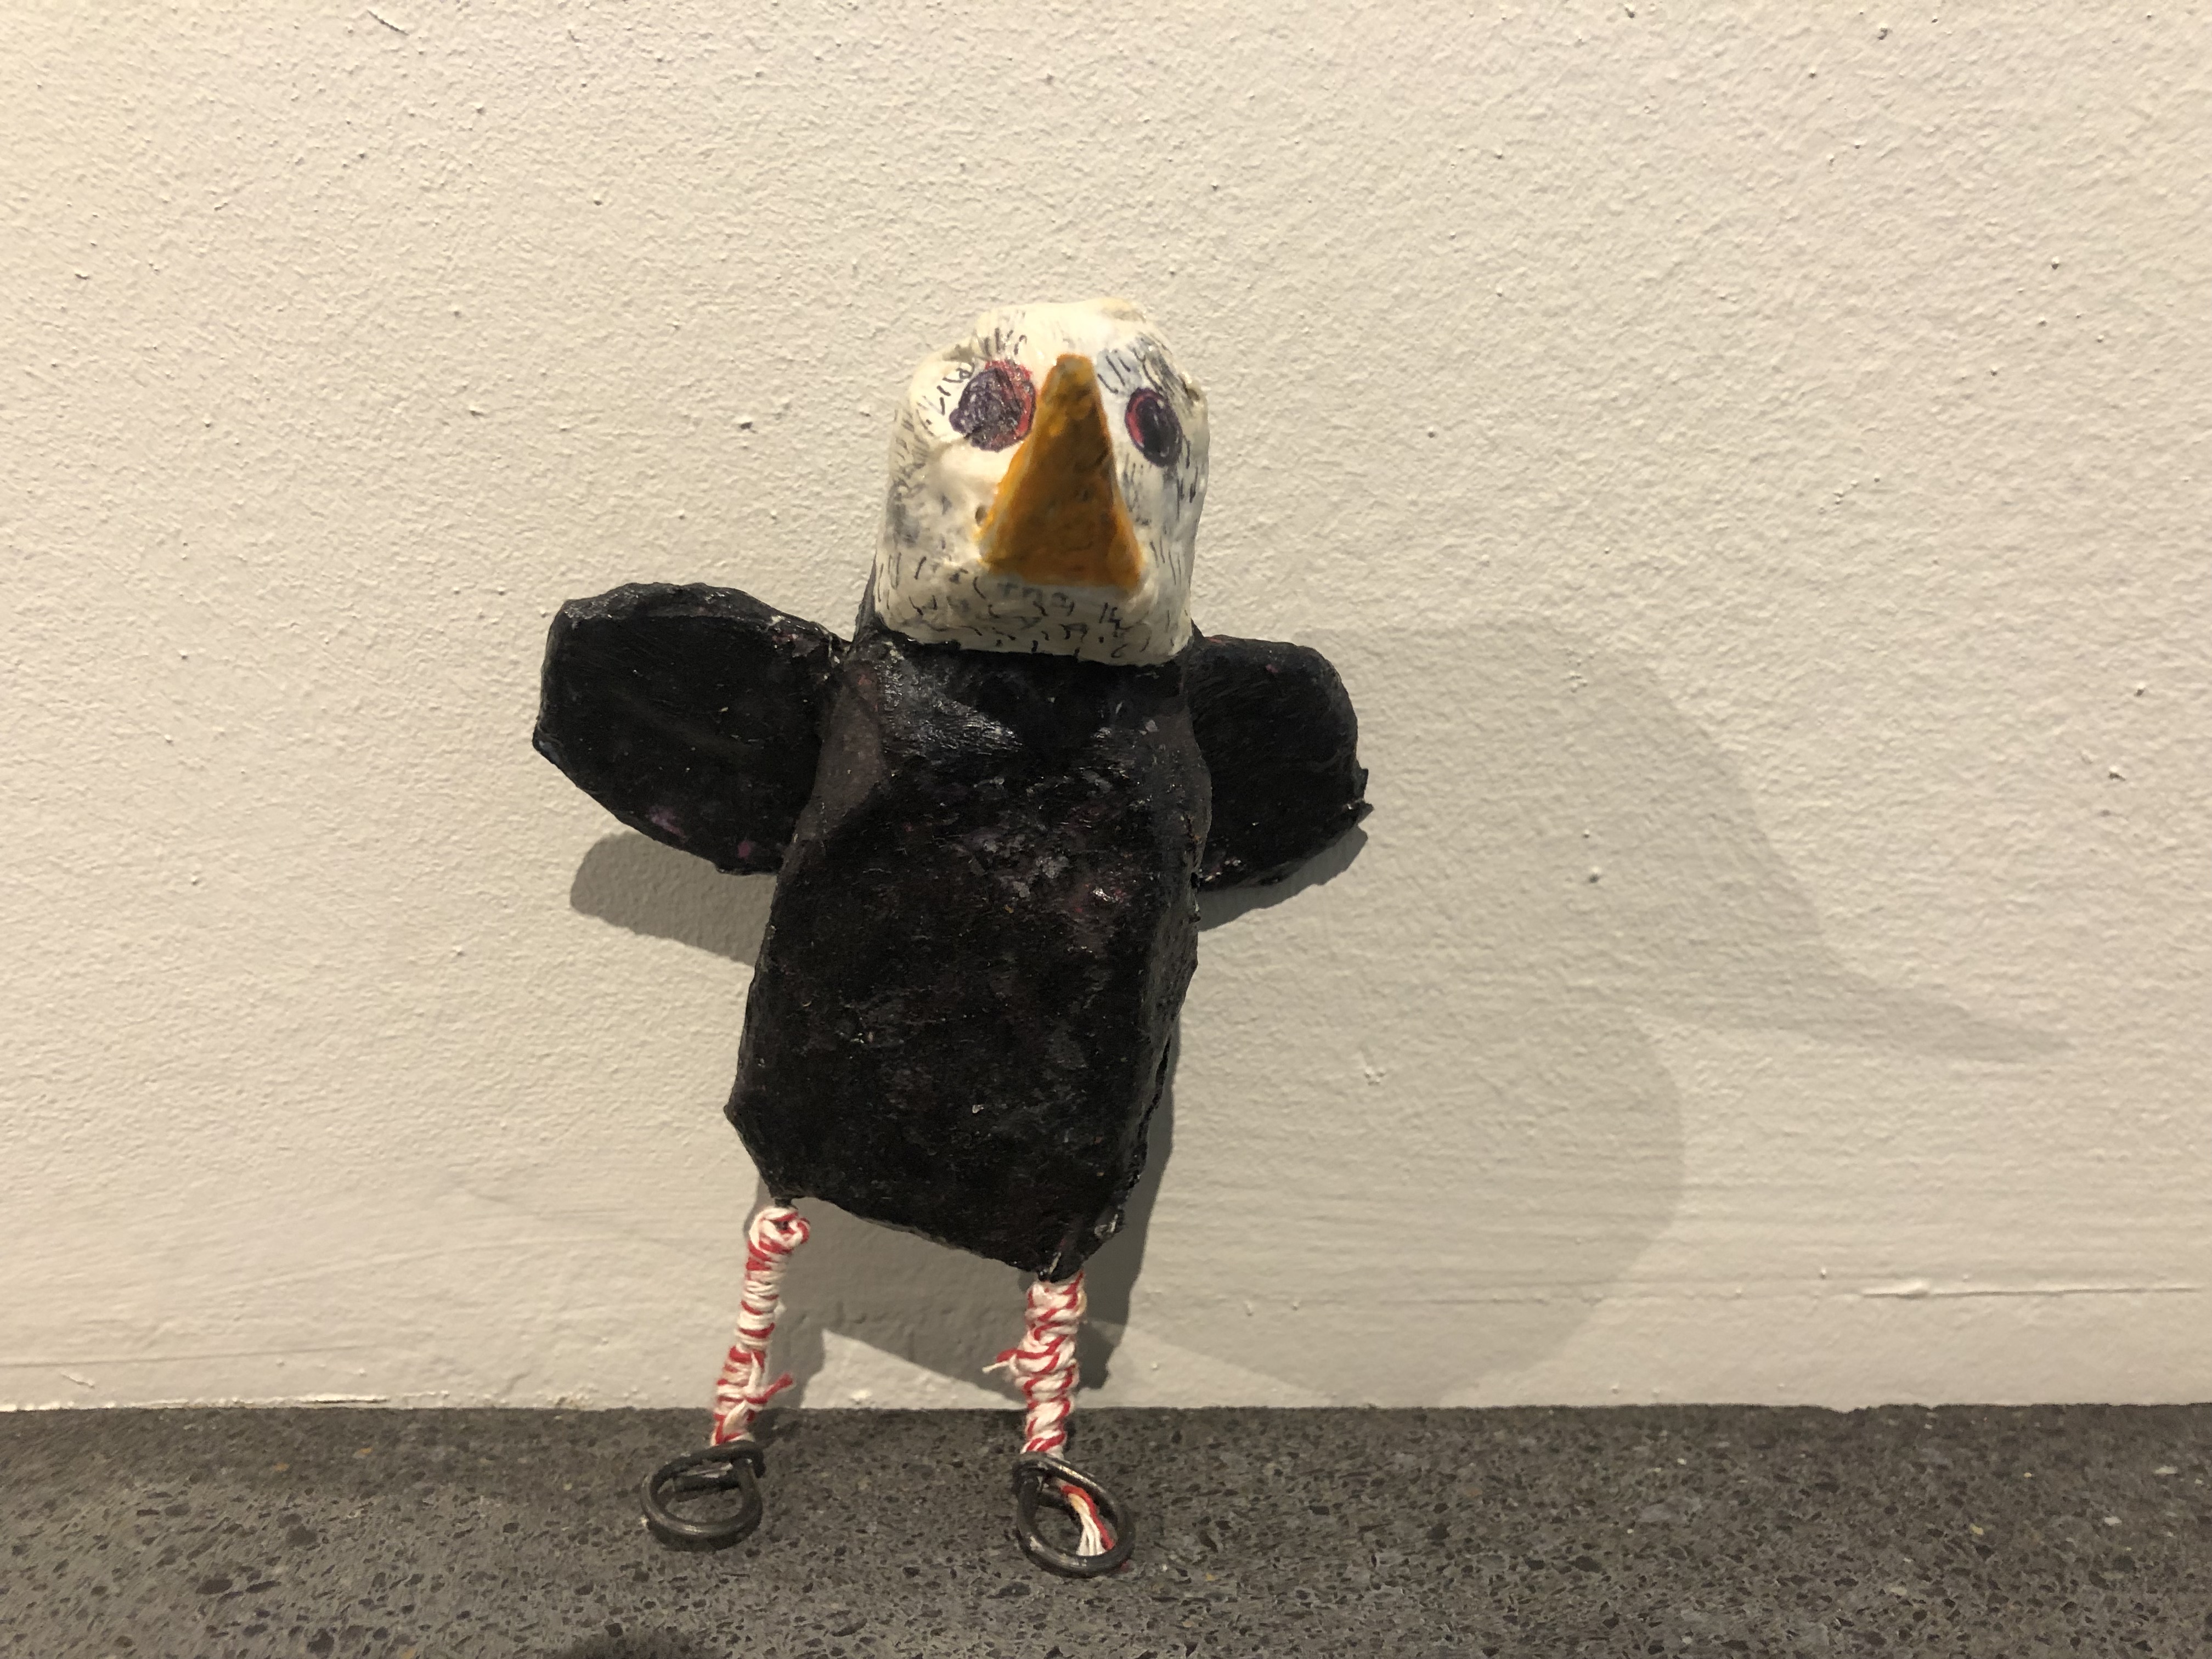 Paper-mache bald eagle with small round wings.